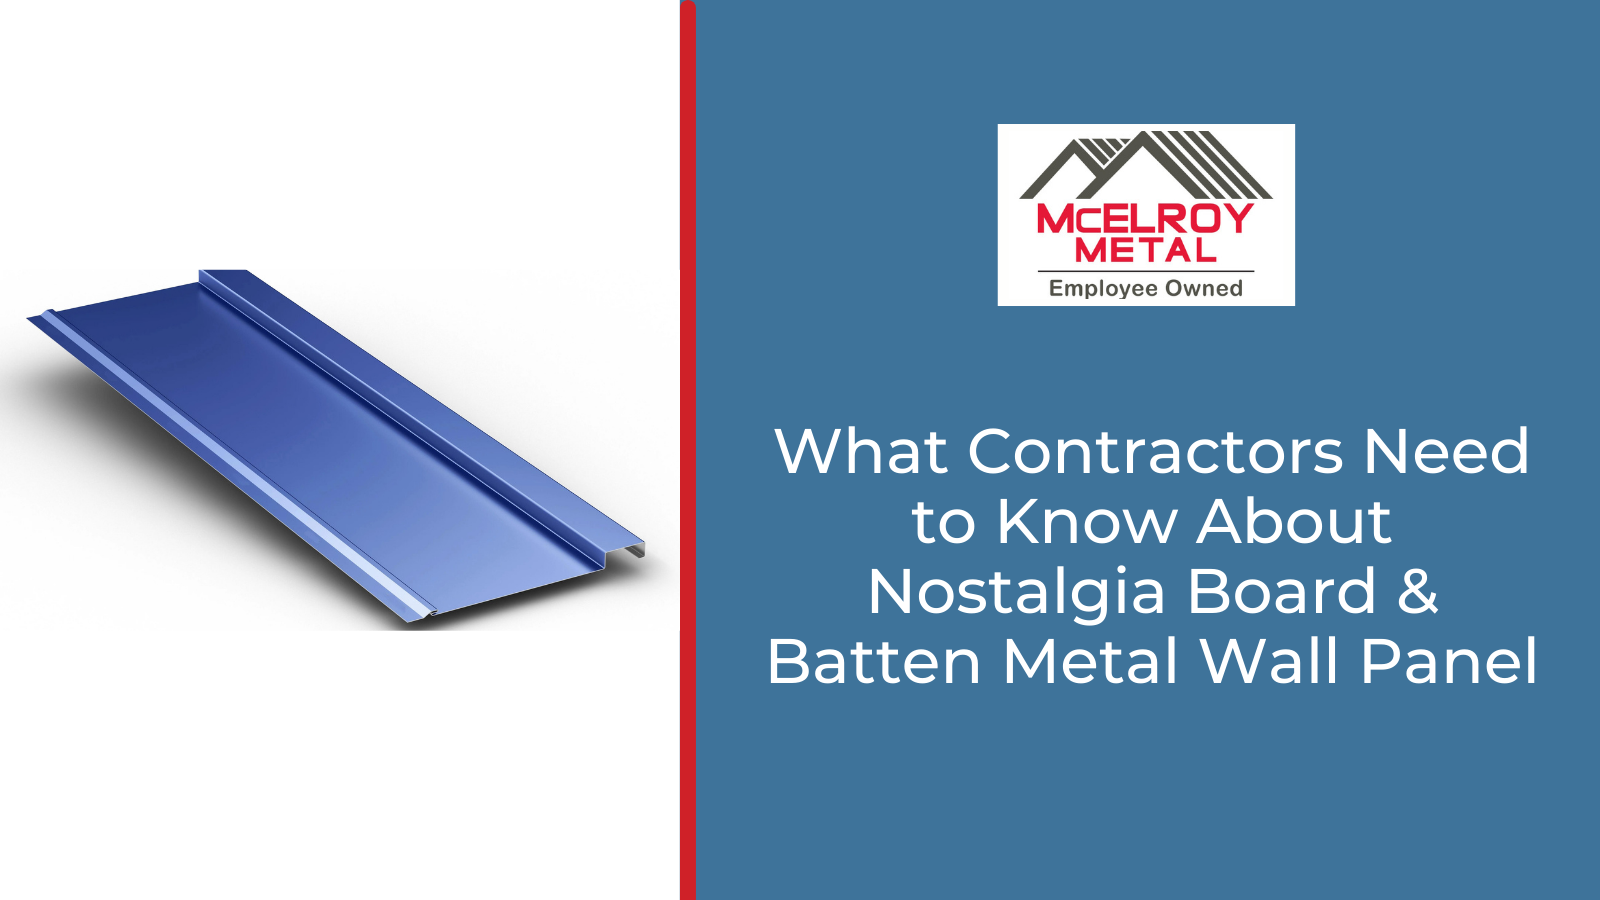 What Contractors Need to Know About Nostalgia Board & Batten Metal Wall Panel